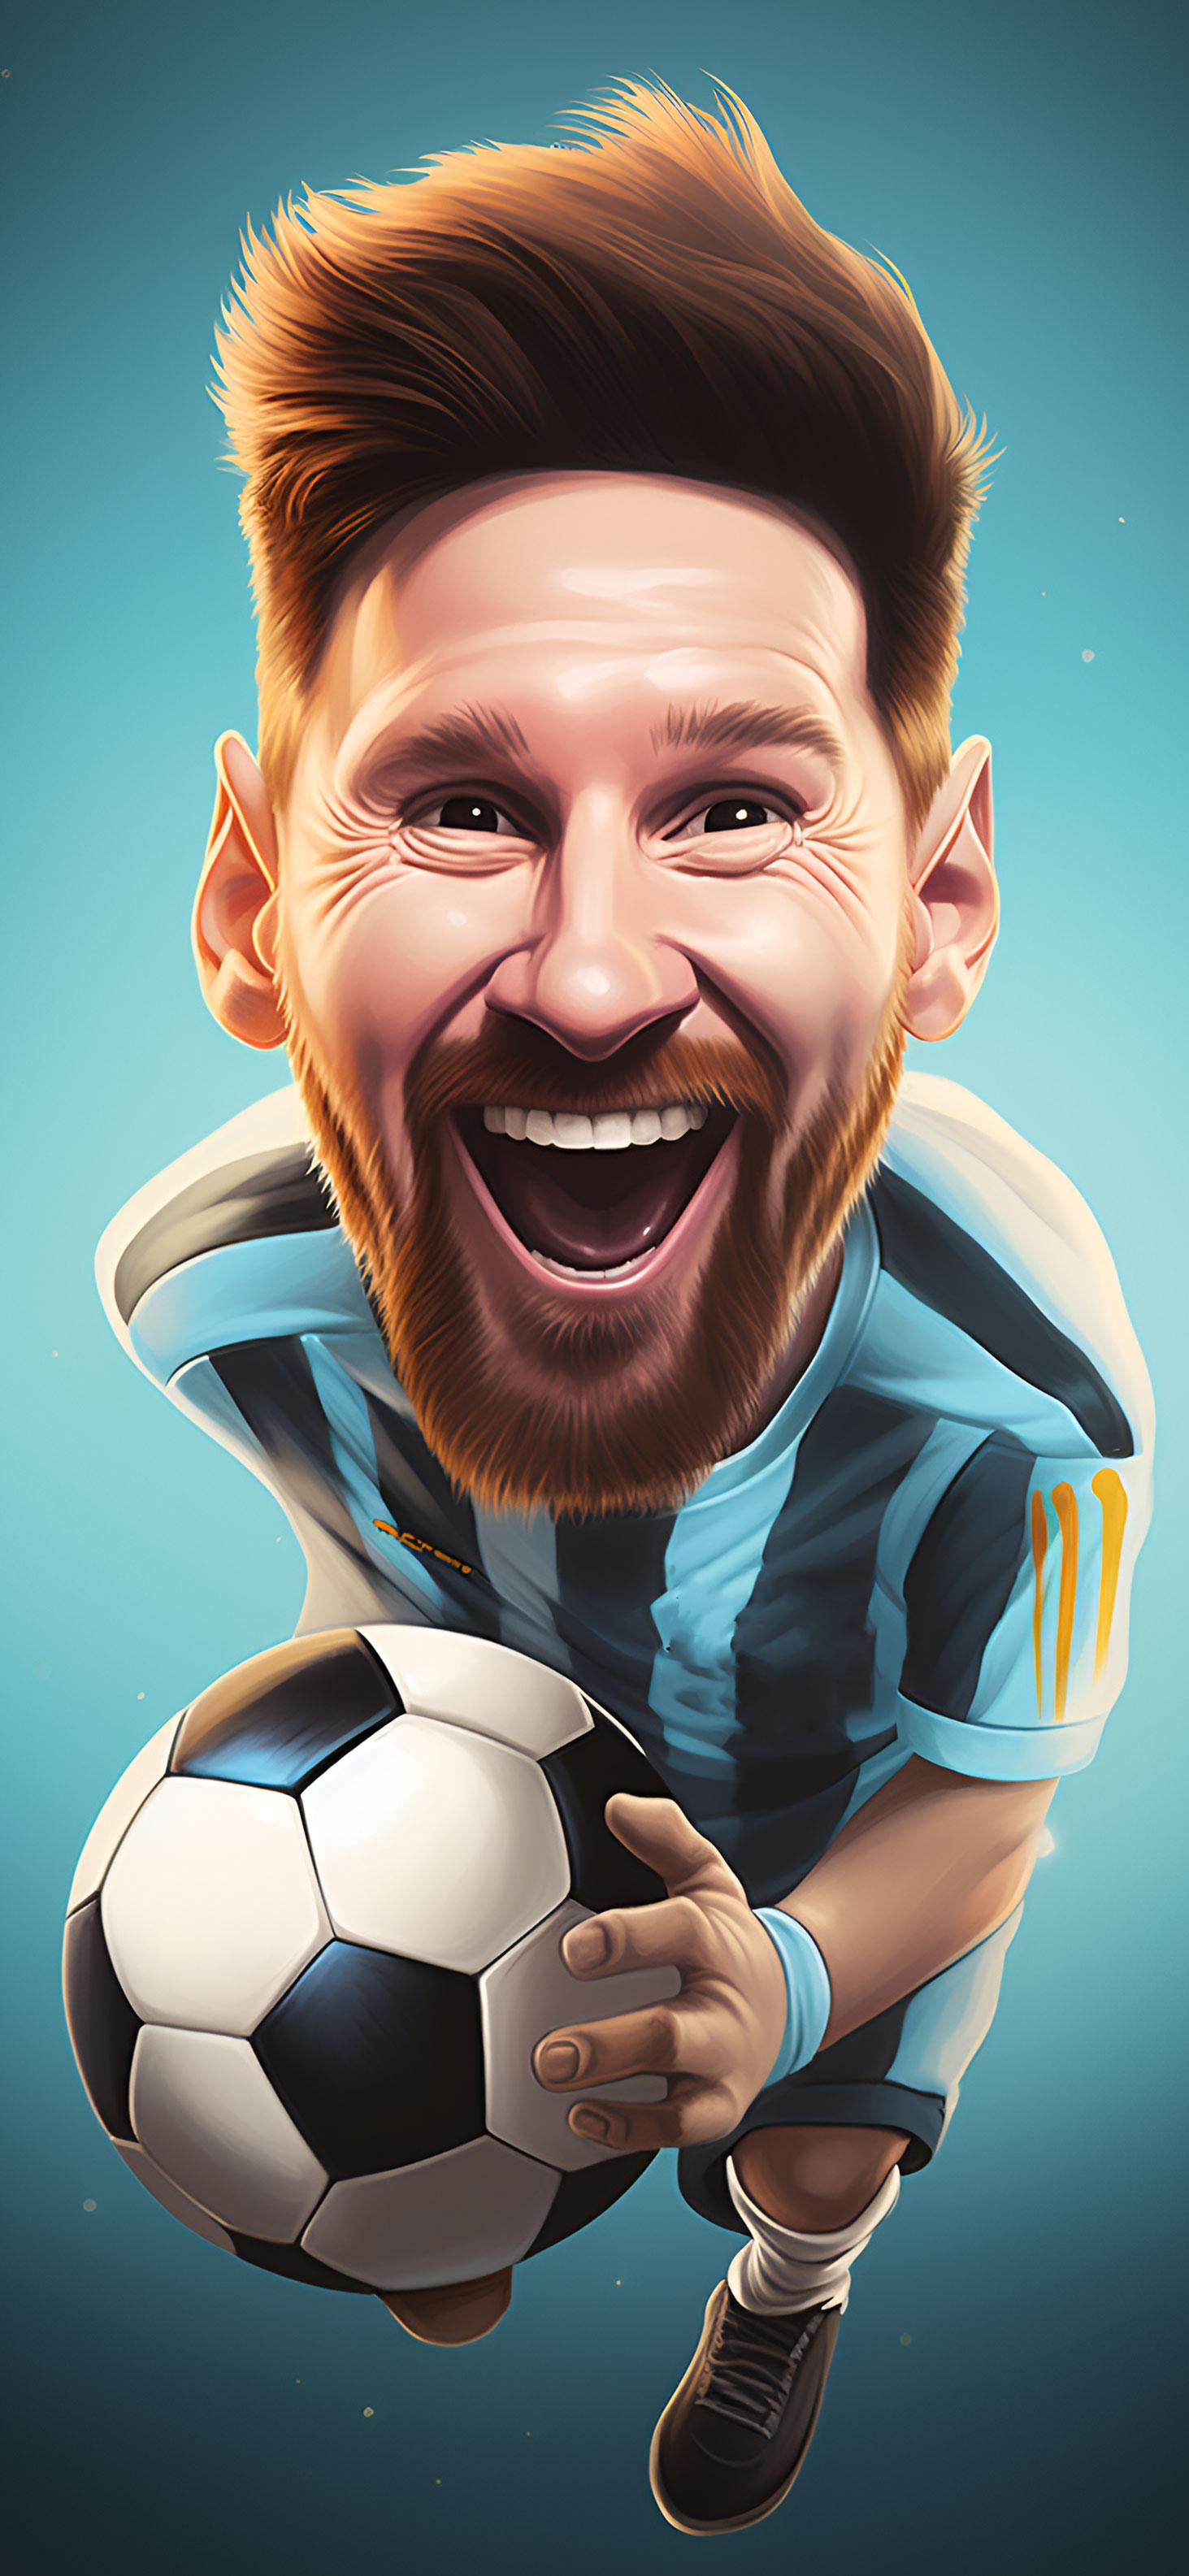 Happy Lionel Messi with Ball Wallpapers   Lionel Messi Wallpaper 4k